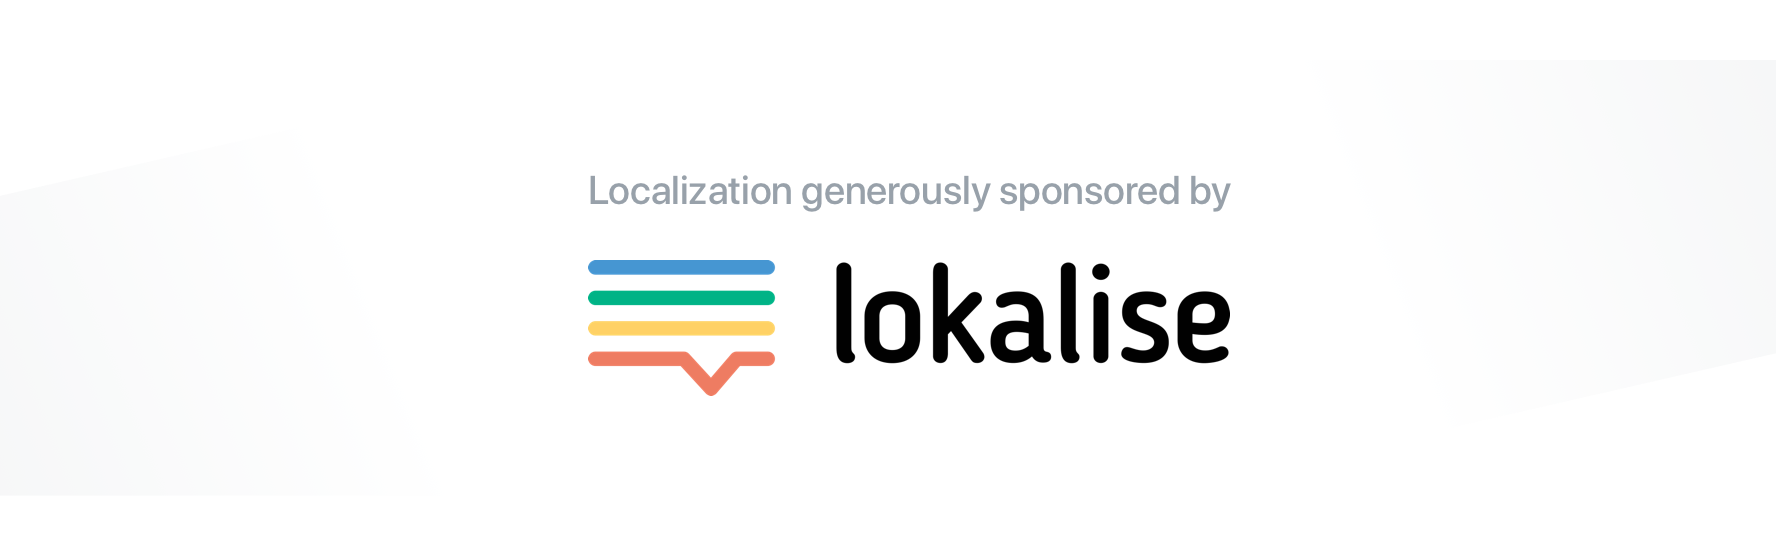 Localization generously sponsored by Lokalise, the best platform for adding lodalization to your applications